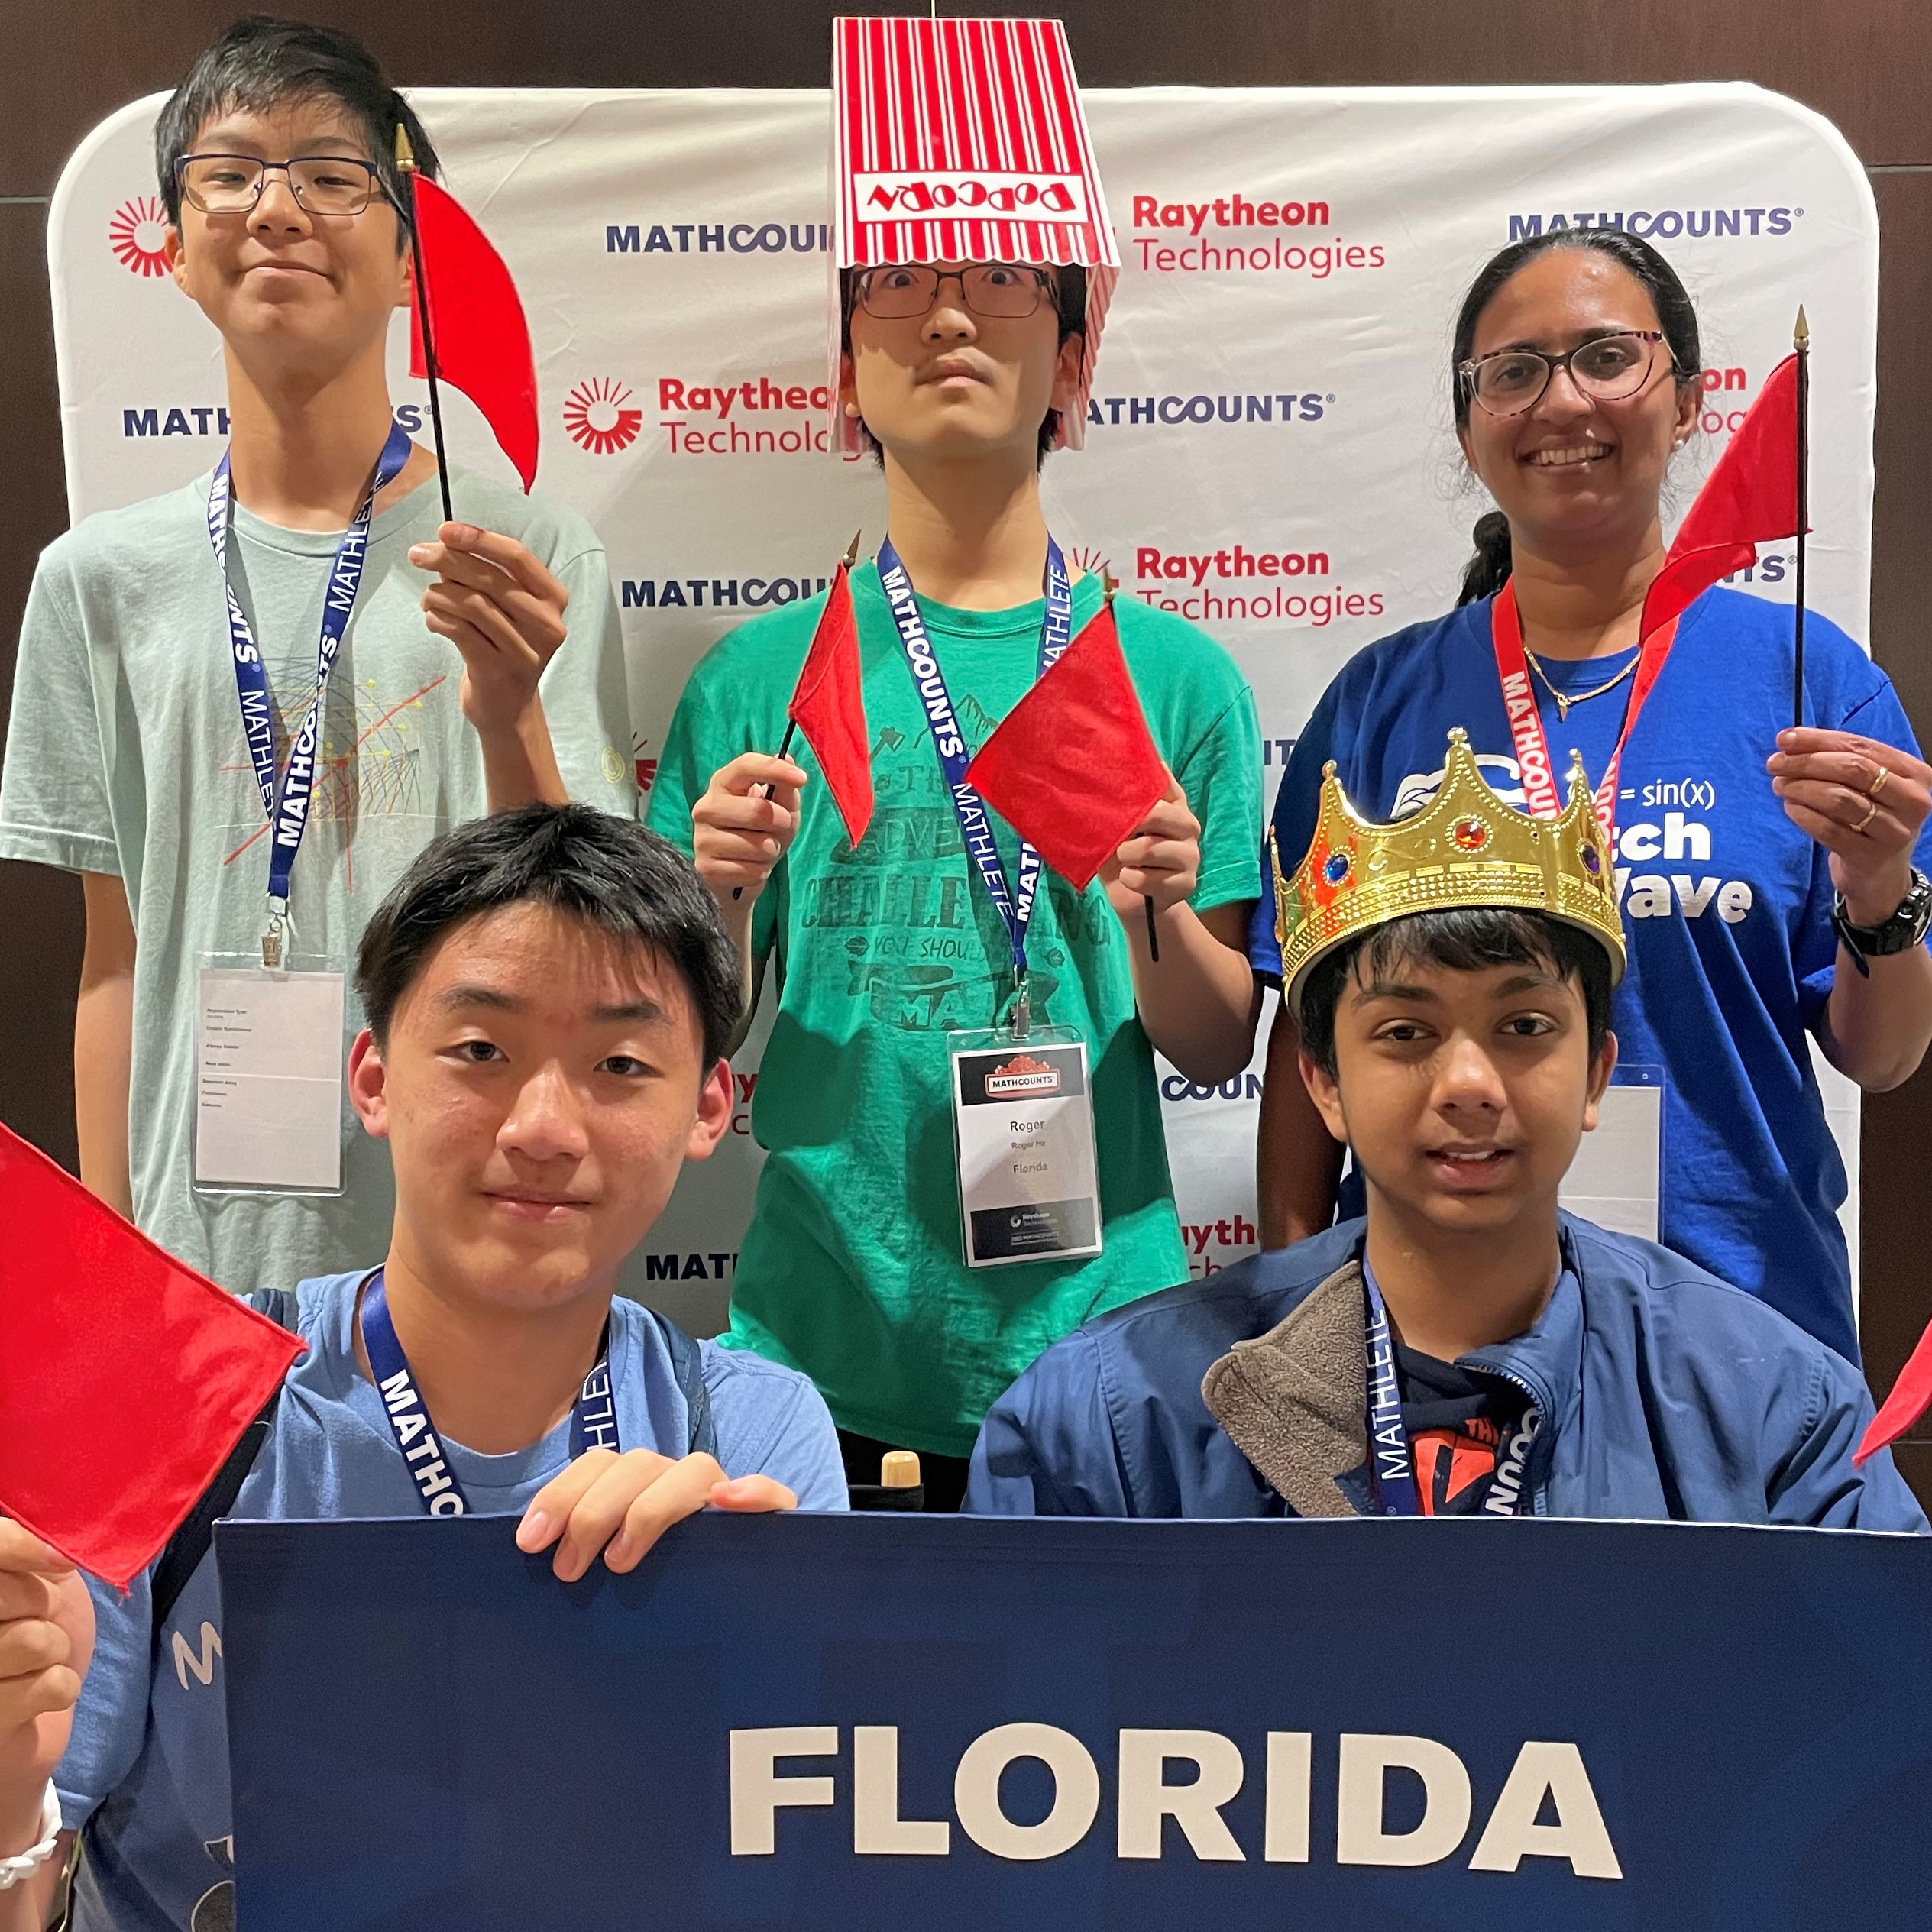 Team florida (4 boys and coach) smile with props in front of a photo booth with their team sign.